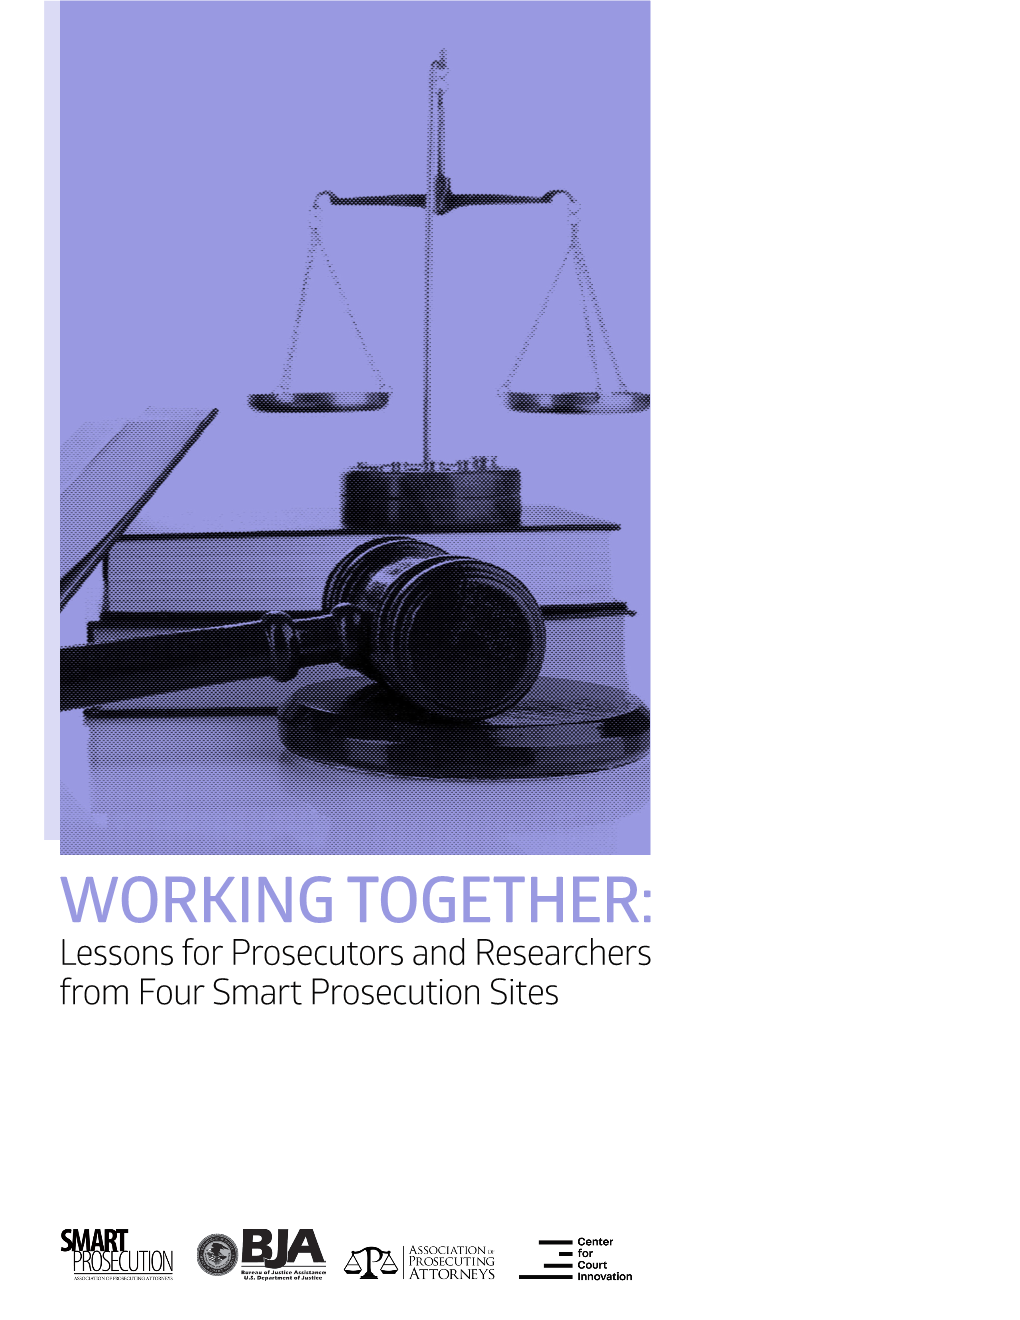 Working Together: Lessons for Prosecutors and Researchers from Four Smart Prosecution Sites